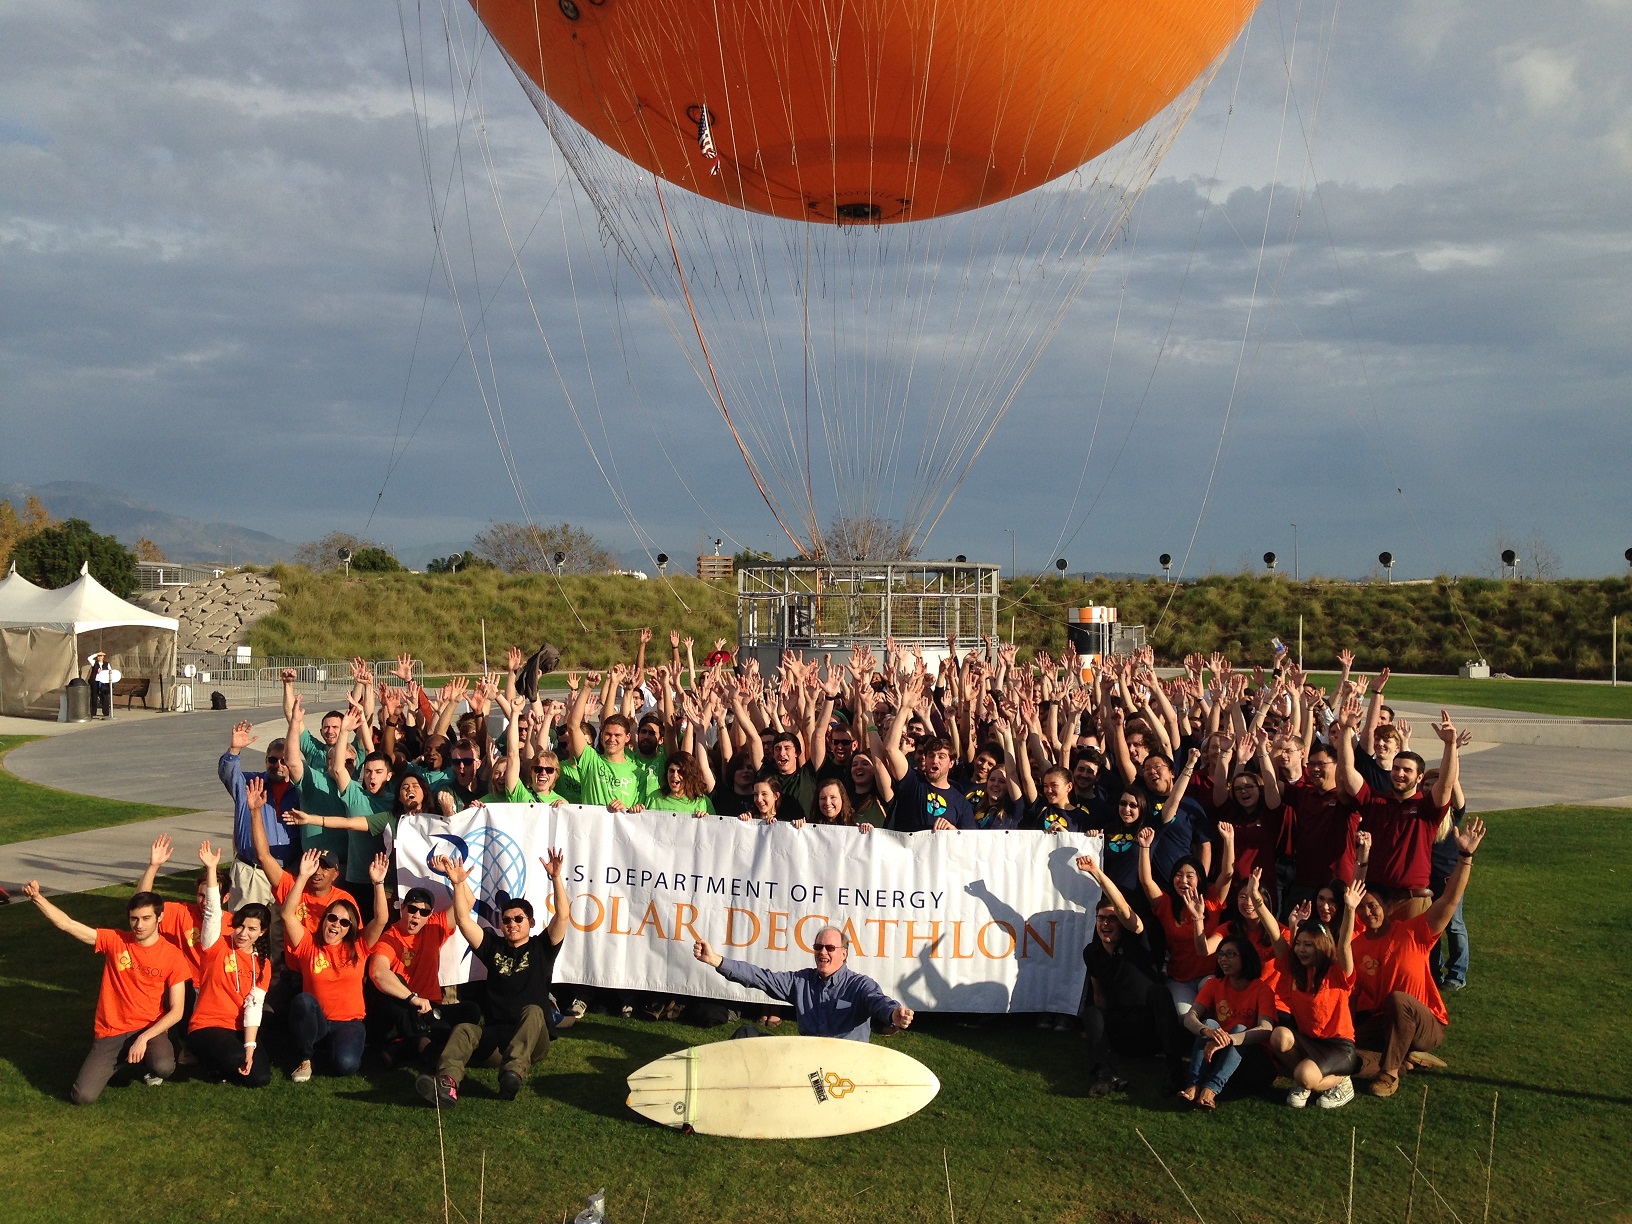 Photo of a large group of cheering people in front of a balloon and holding a banner that reads, “U.S. Department of Energy Solar Decathlon.”